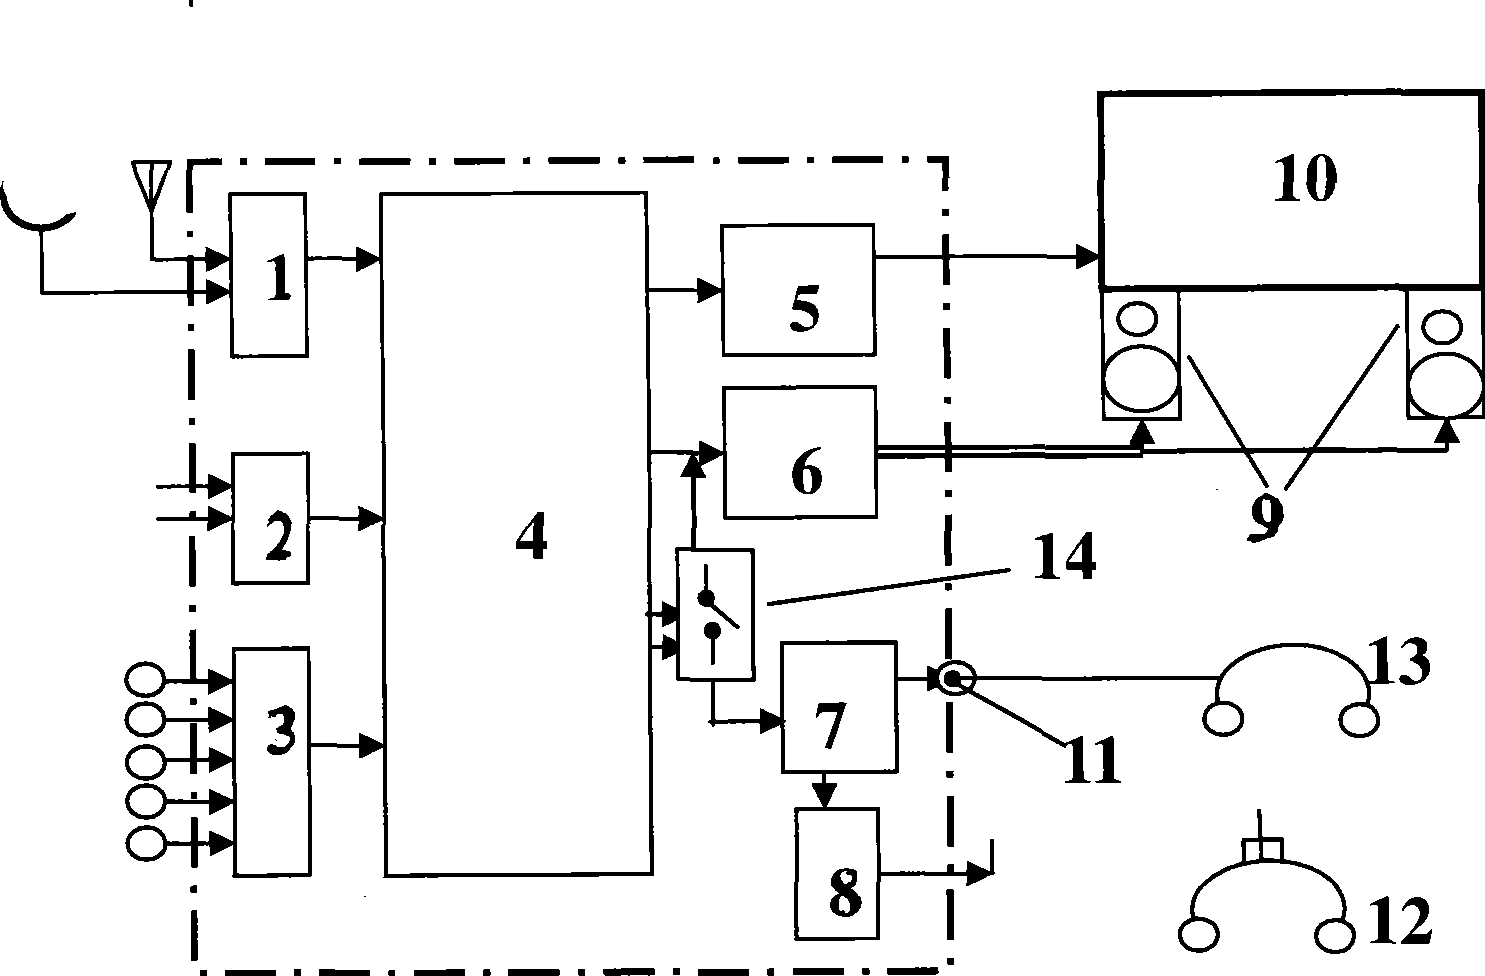 Video and audio program signal processing system having multiple functions